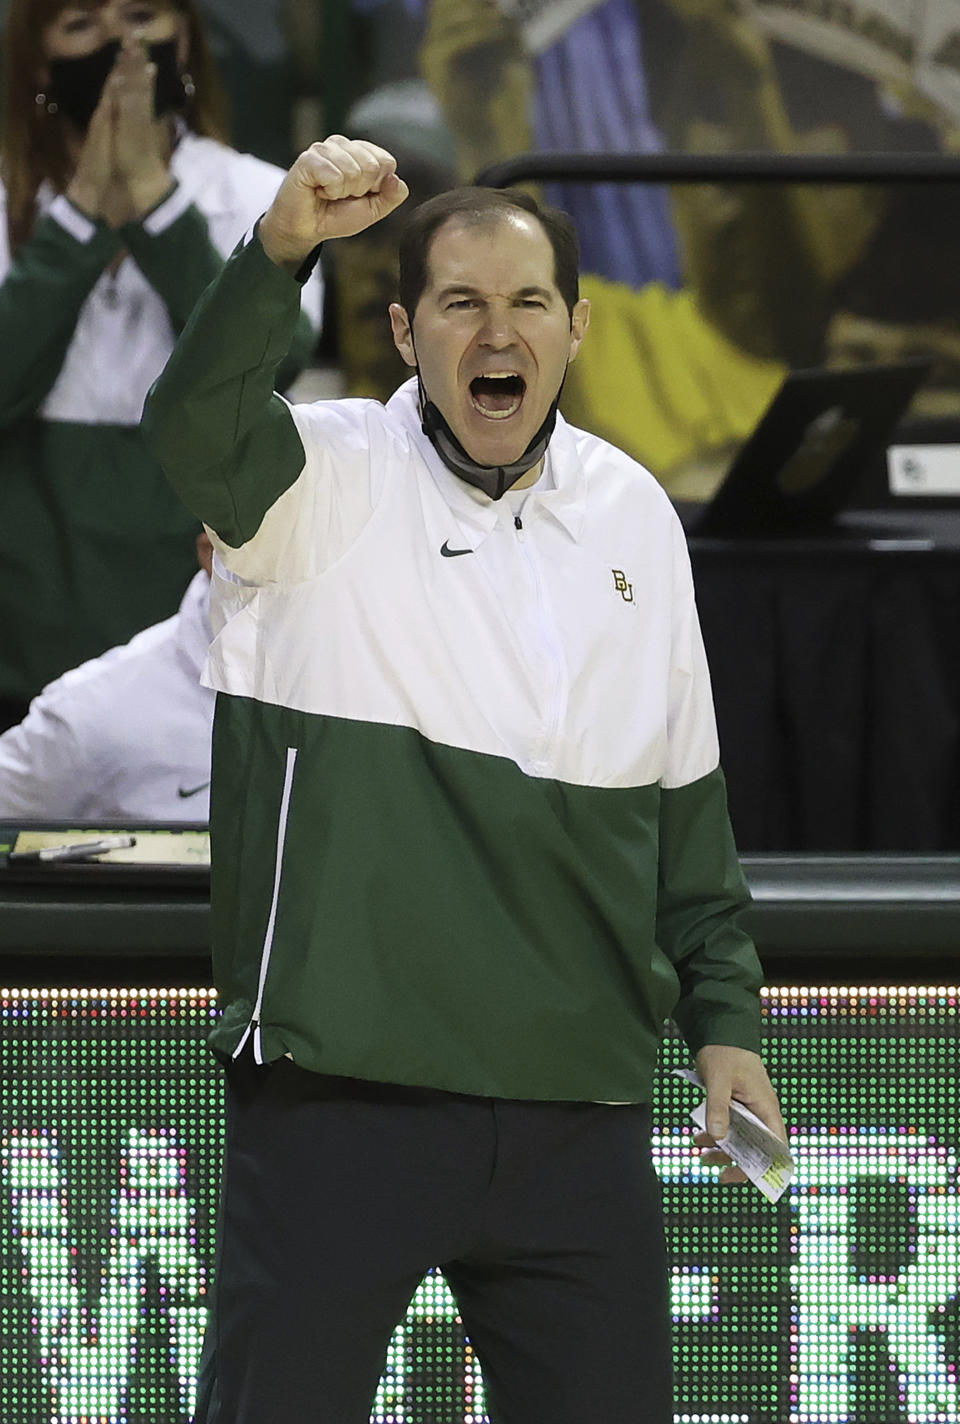 Baylor head coach Scott Drew reacts as his team scores in the second half of an NCAA college basketball game against Texas Tech Sunday, March 7, 2021, in Waco, Texas. (AP Photo/Jerry Larson)